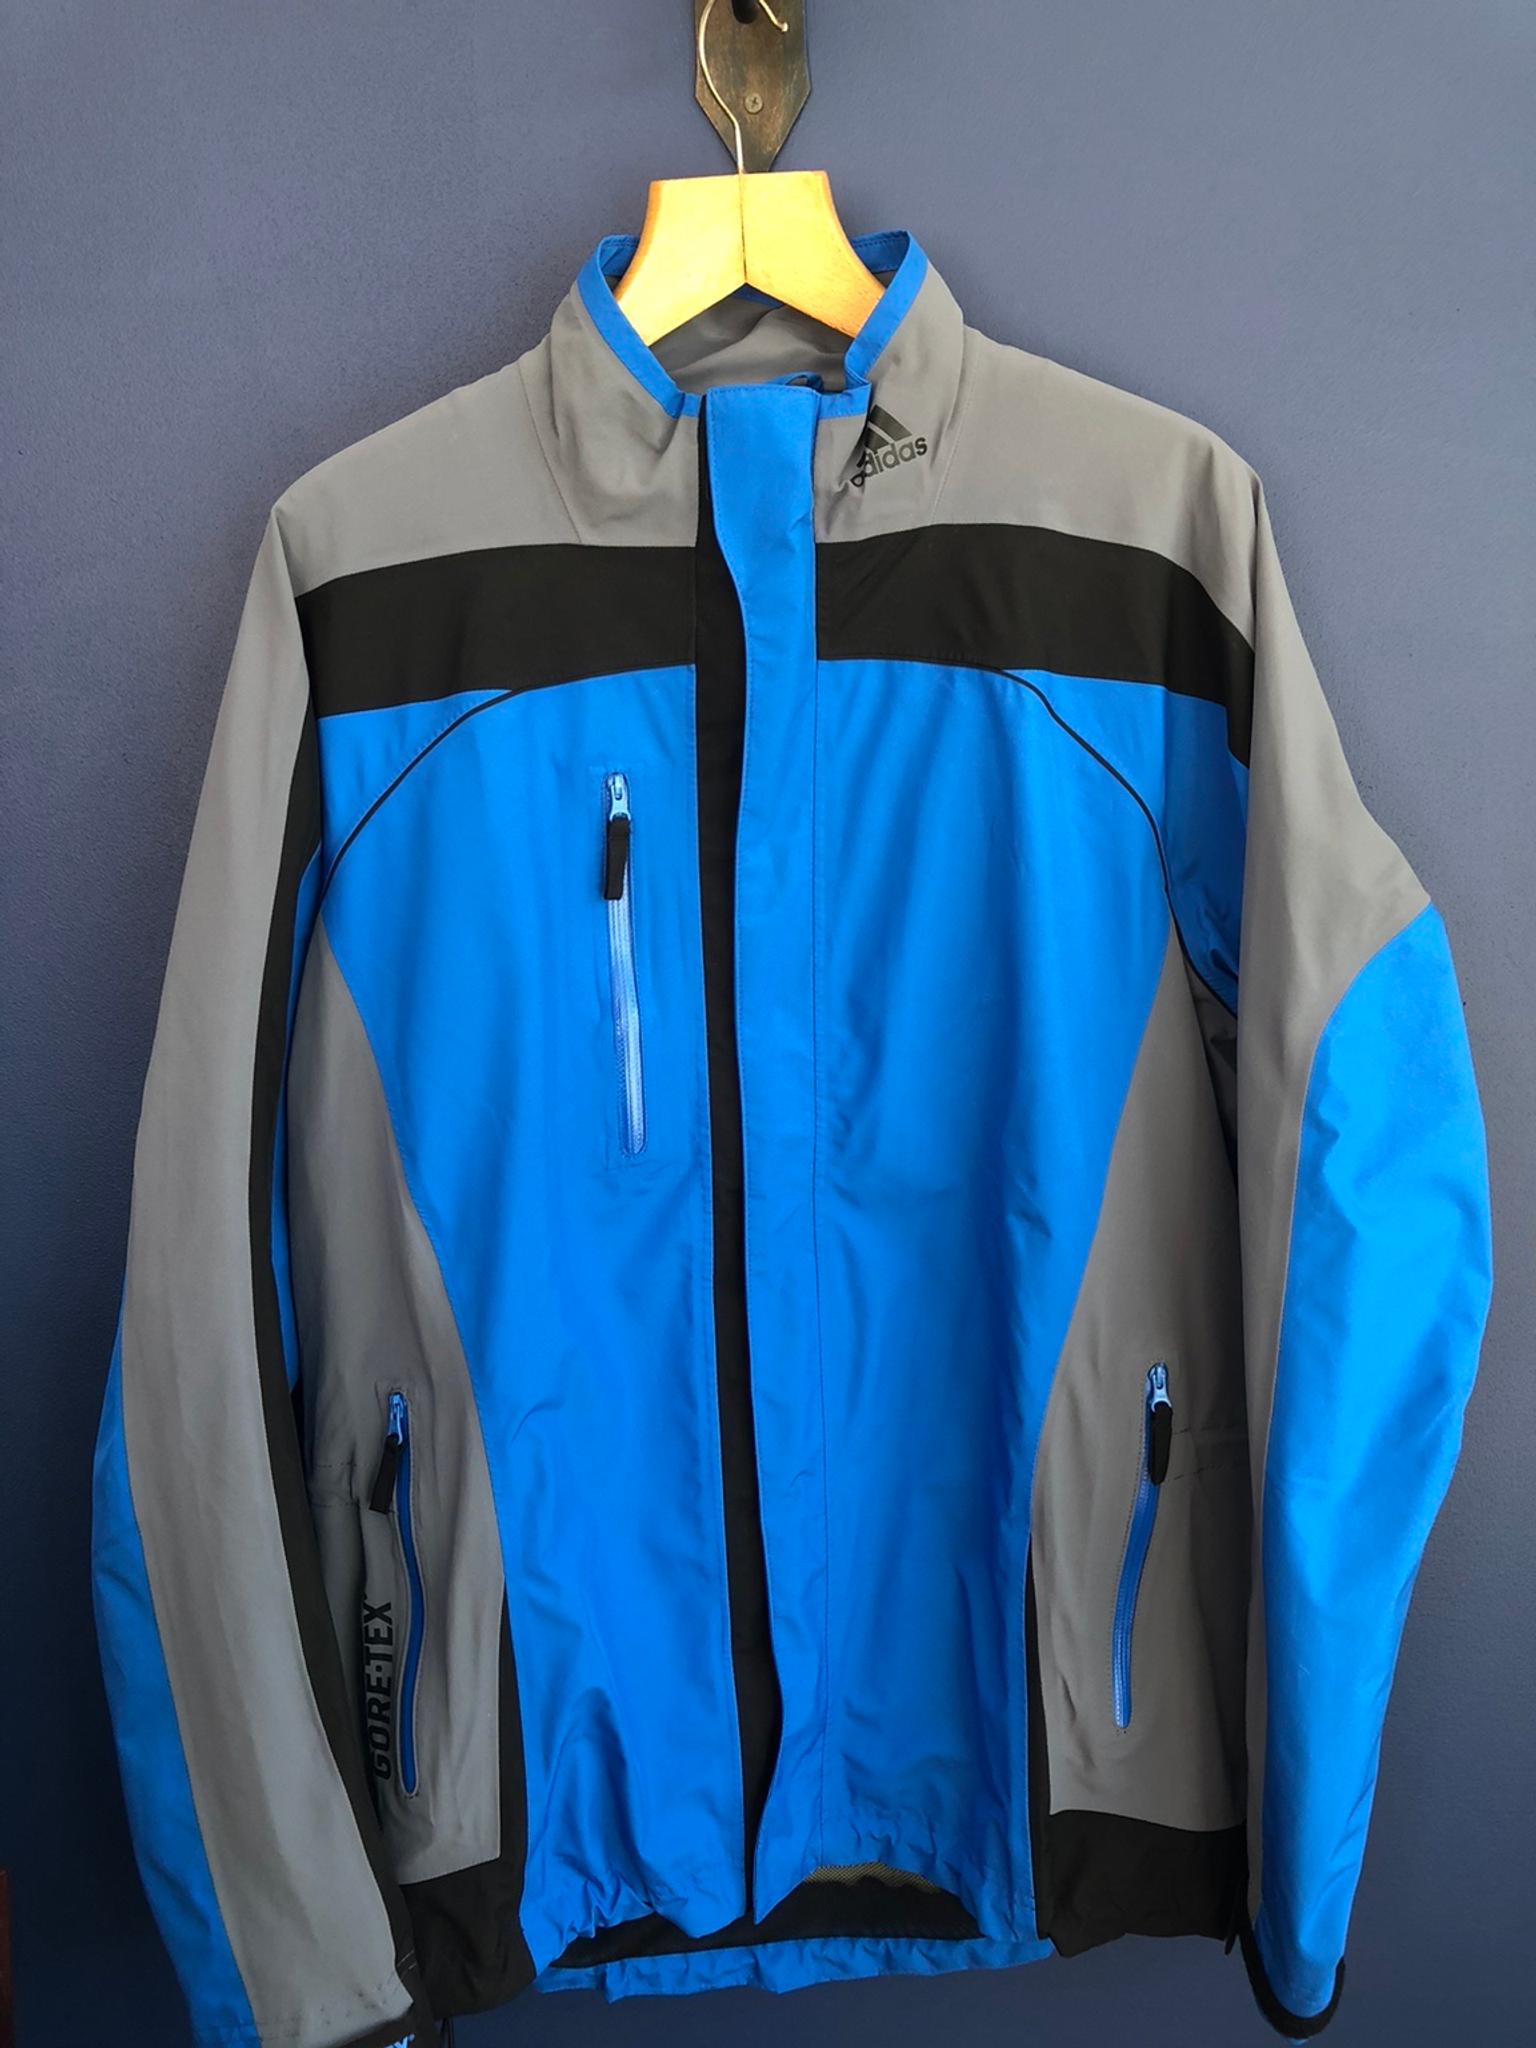 Adidas Gore Tex Waterproof Golf Jacket In Wolverhampton For 40 00 For Sale Shpock